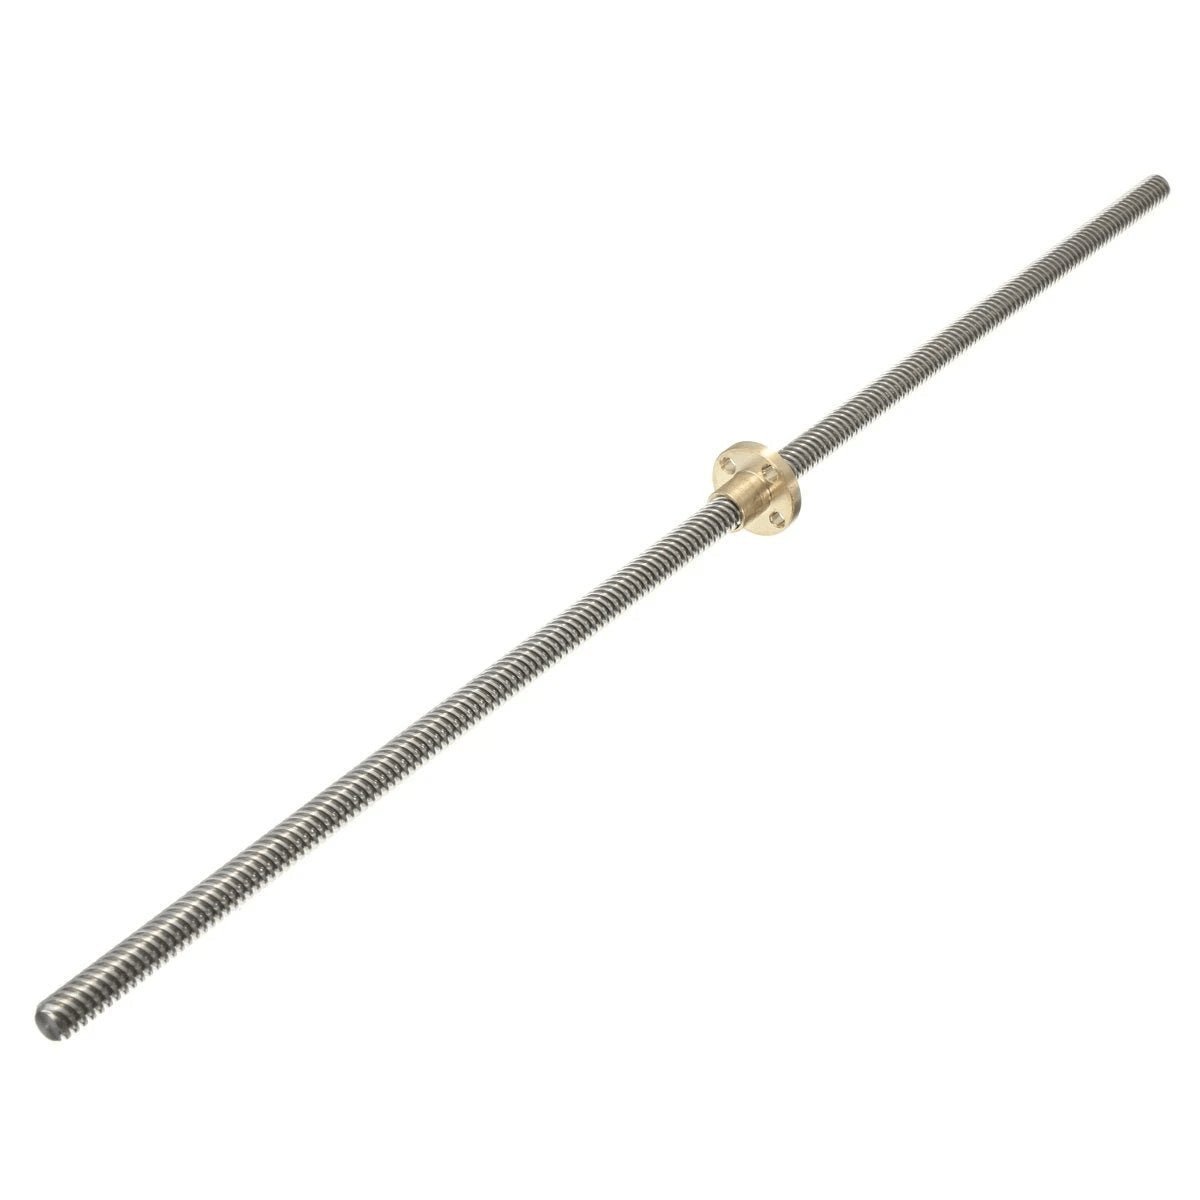 500mm Z-Axis Stainless Steel Threaded Rod Lead Screw with T8 Nut